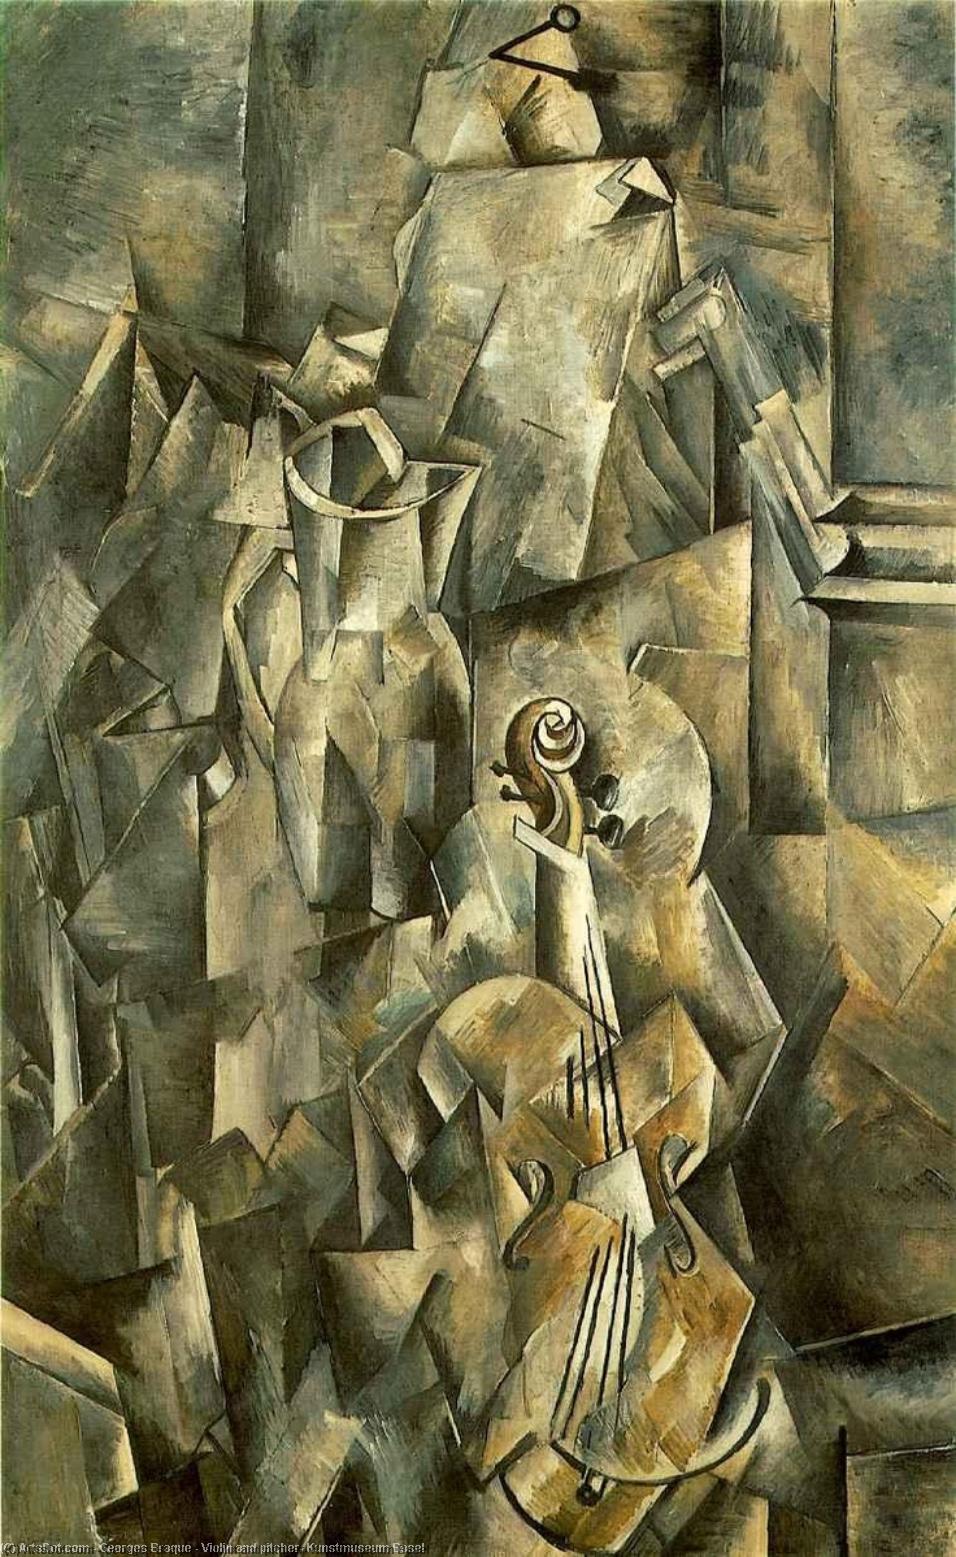 WikiOO.org - 백과 사전 - 회화, 삽화 Georges Braque - Violin and pitcher, Kunstmuseum Basel